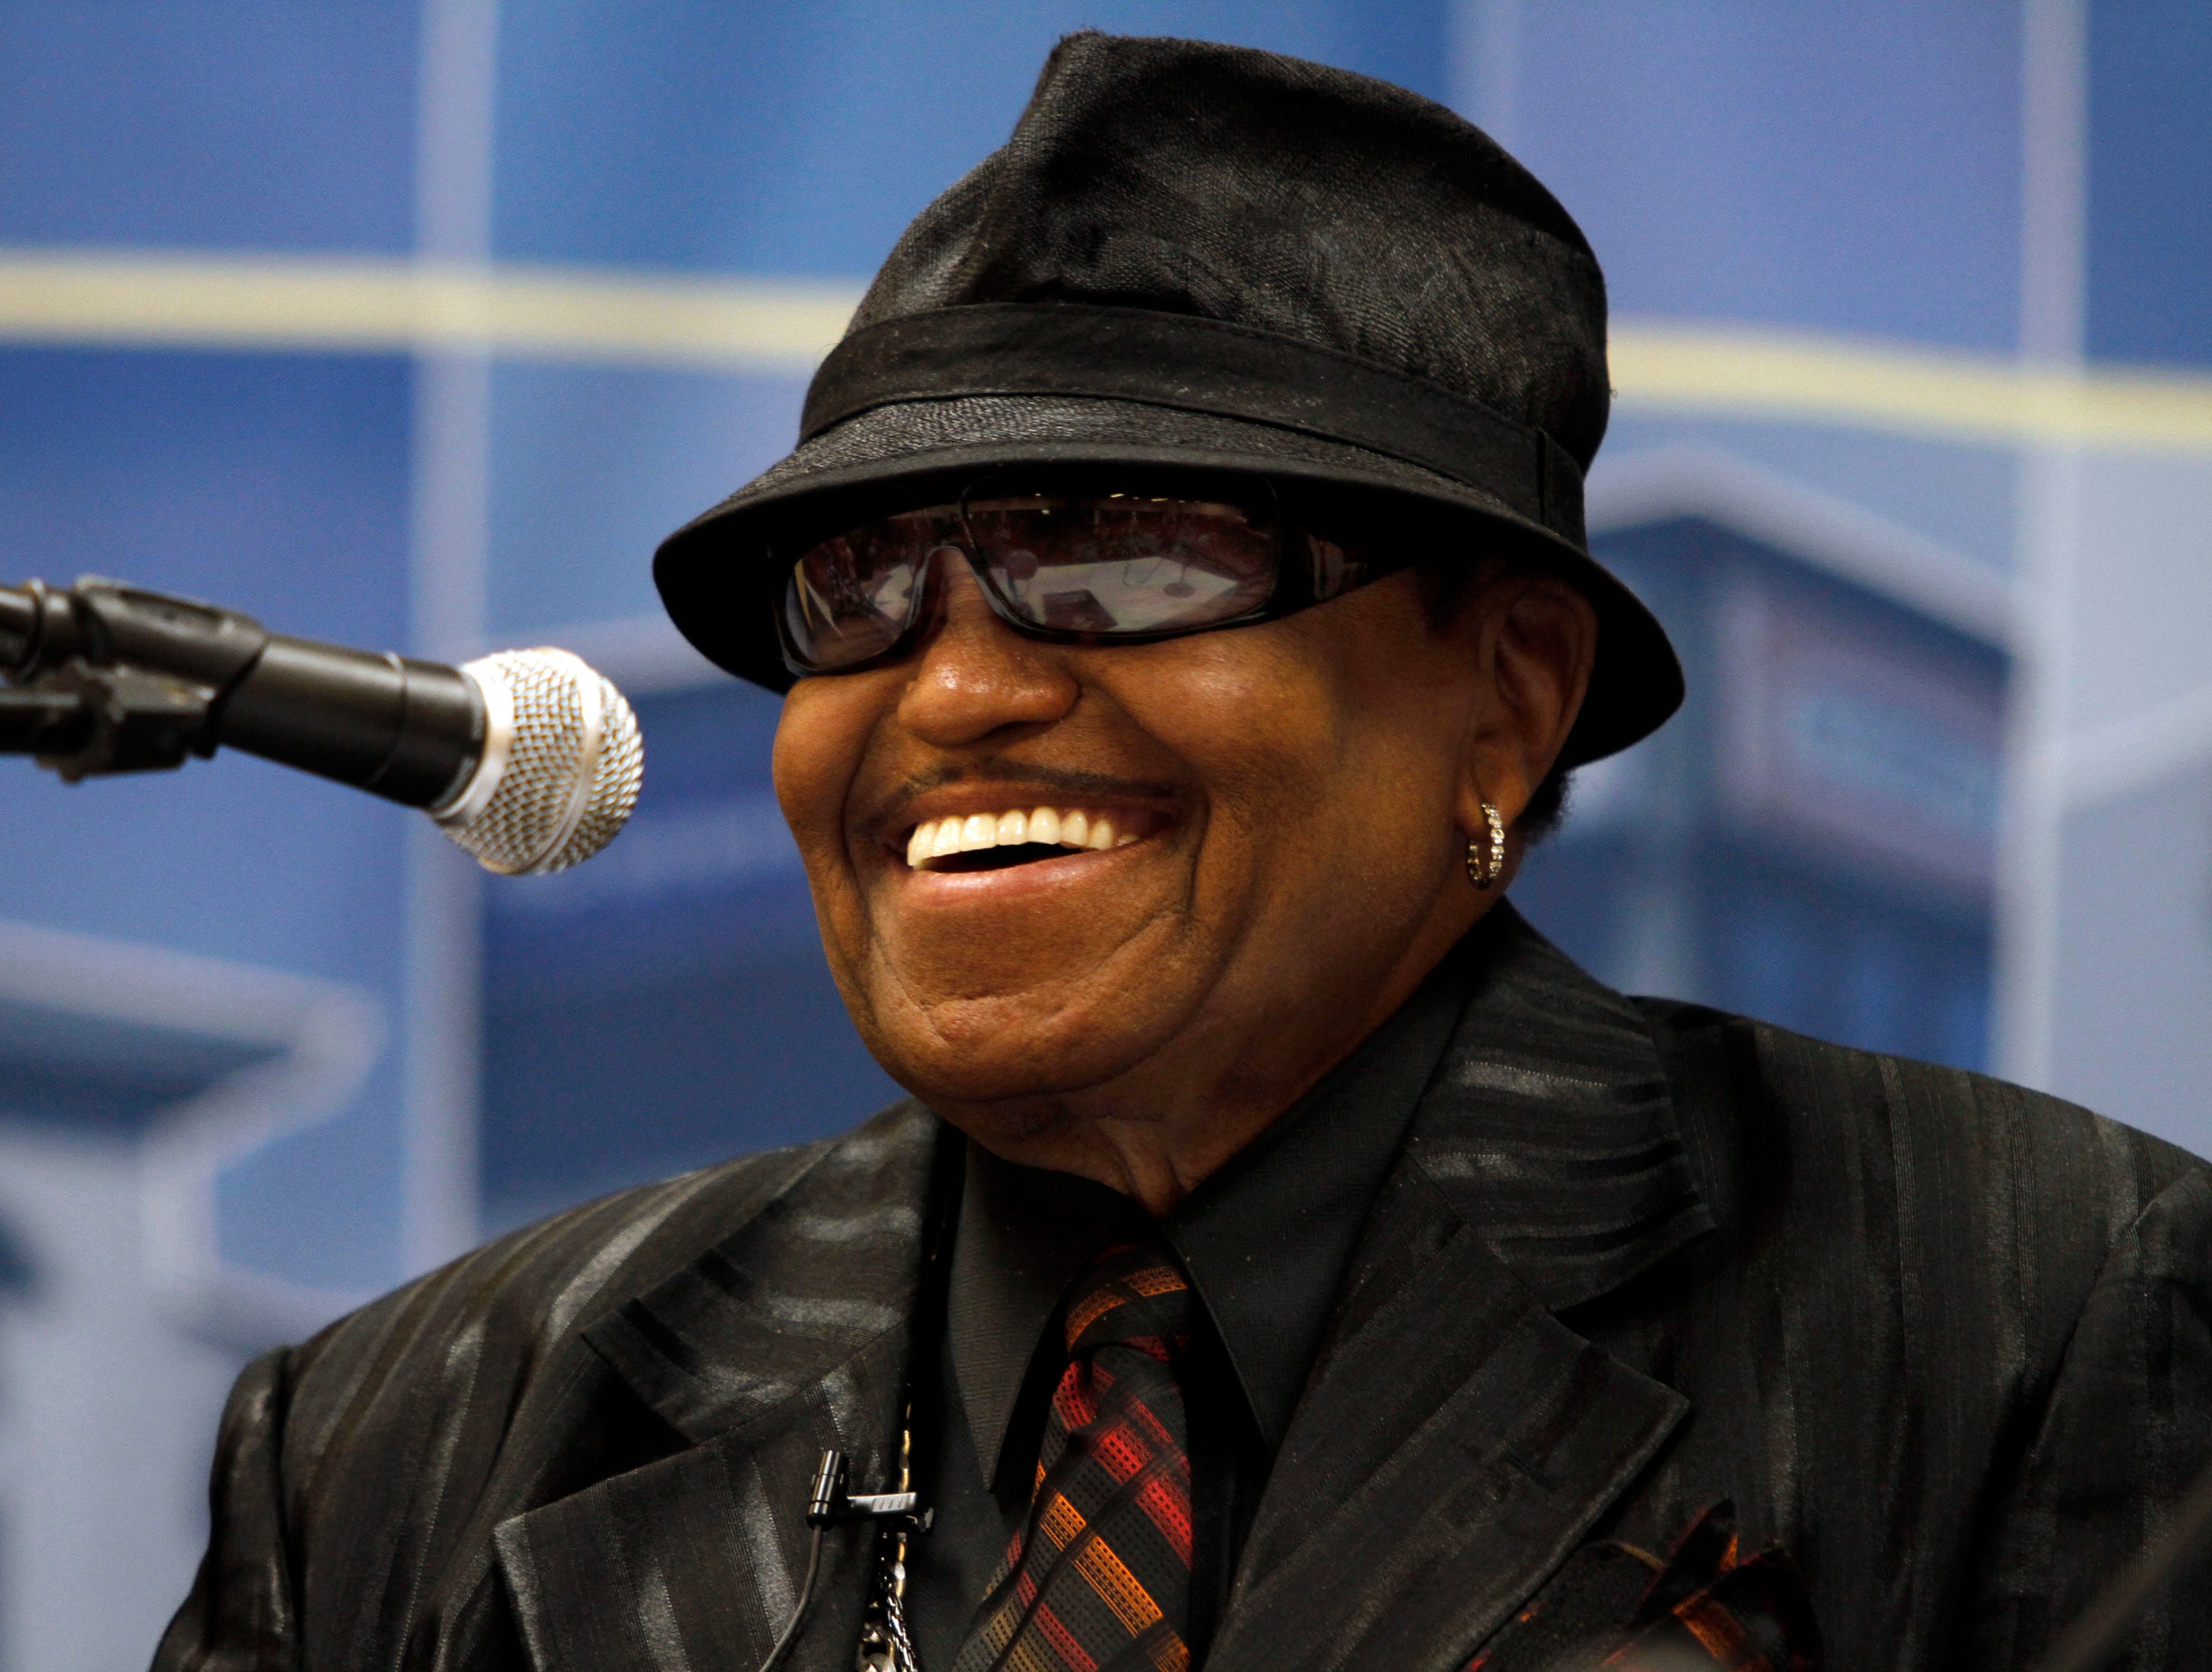 Joe Jackson, father of Michael and Janet Jackson, dead at 89